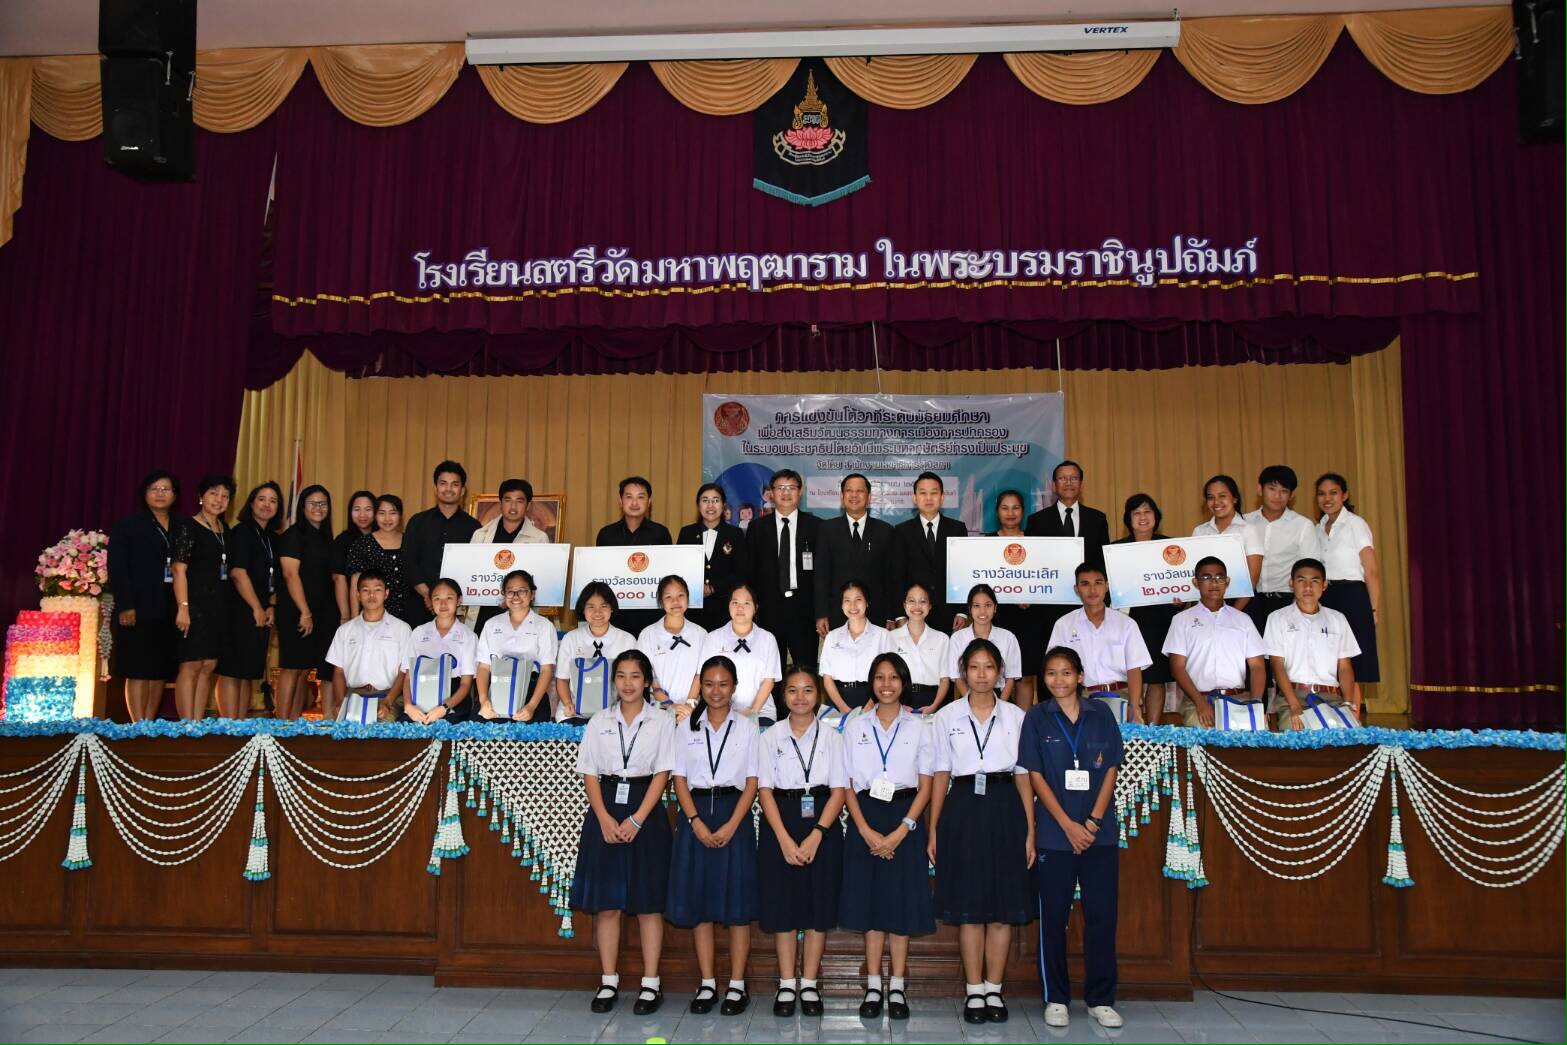 12 June 2019, at Mahaprutaram Girls' School under the Royal Patronage of Her Majesty the Queen, Bangkok 